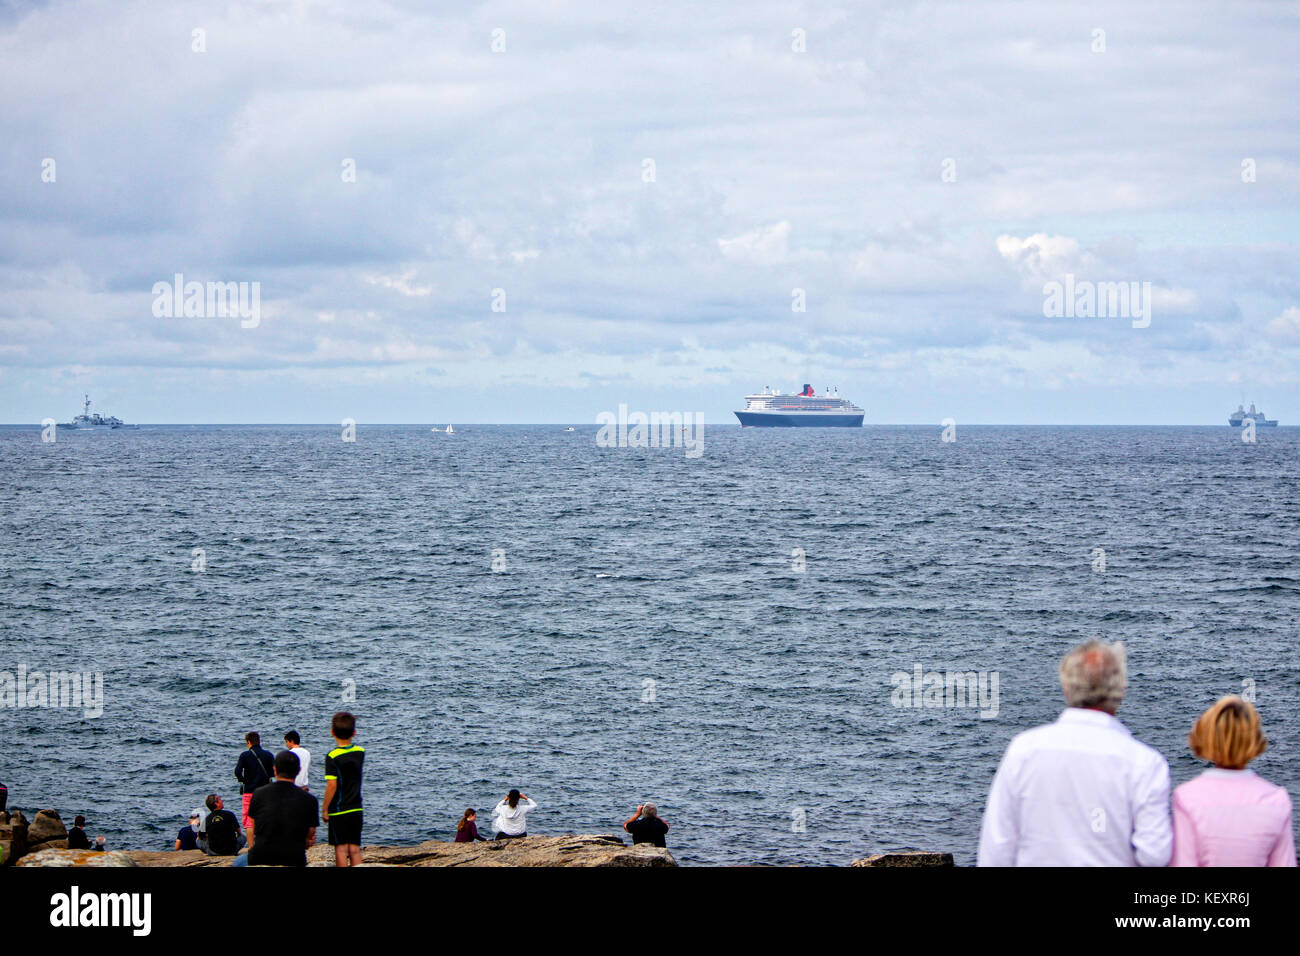 the Queen Mary 2 passing Groix Island, on her way to Saint Nazaire for the start of the centennial Transat The Bridge 2017, a historic transatlantic race between her and a fleet of giant trimarans. Stock Photo